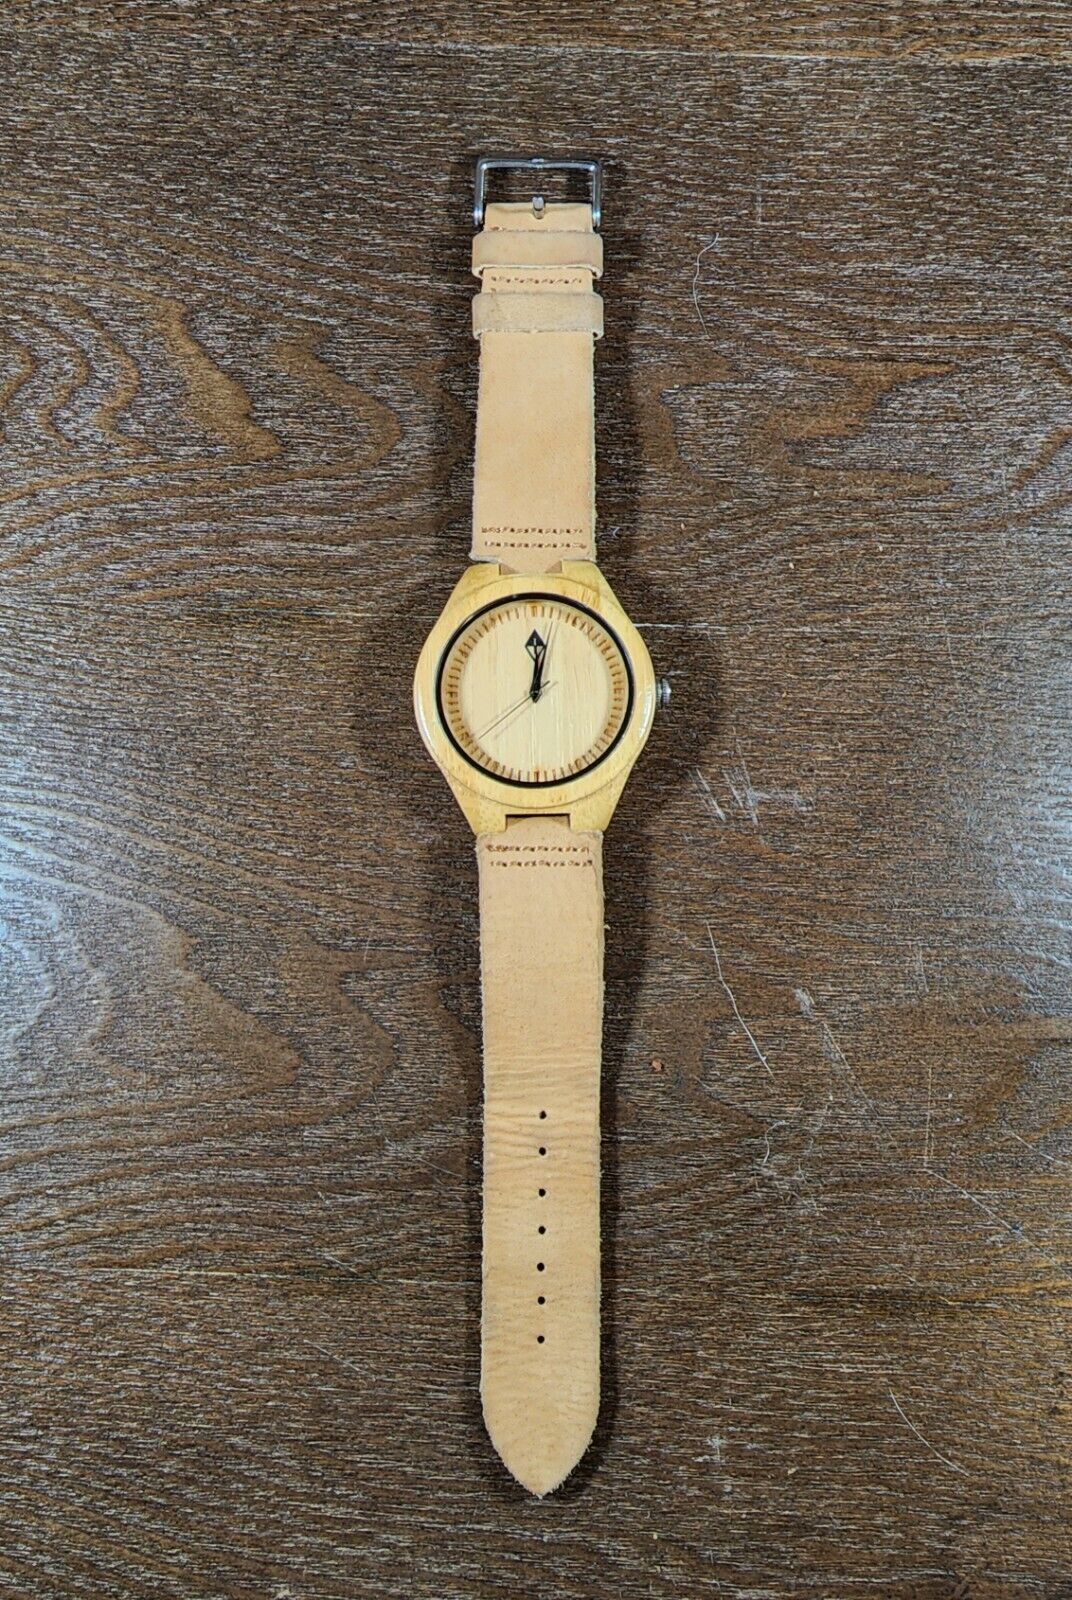 WoodGraine wooden watch with soft suede strap. New battery.